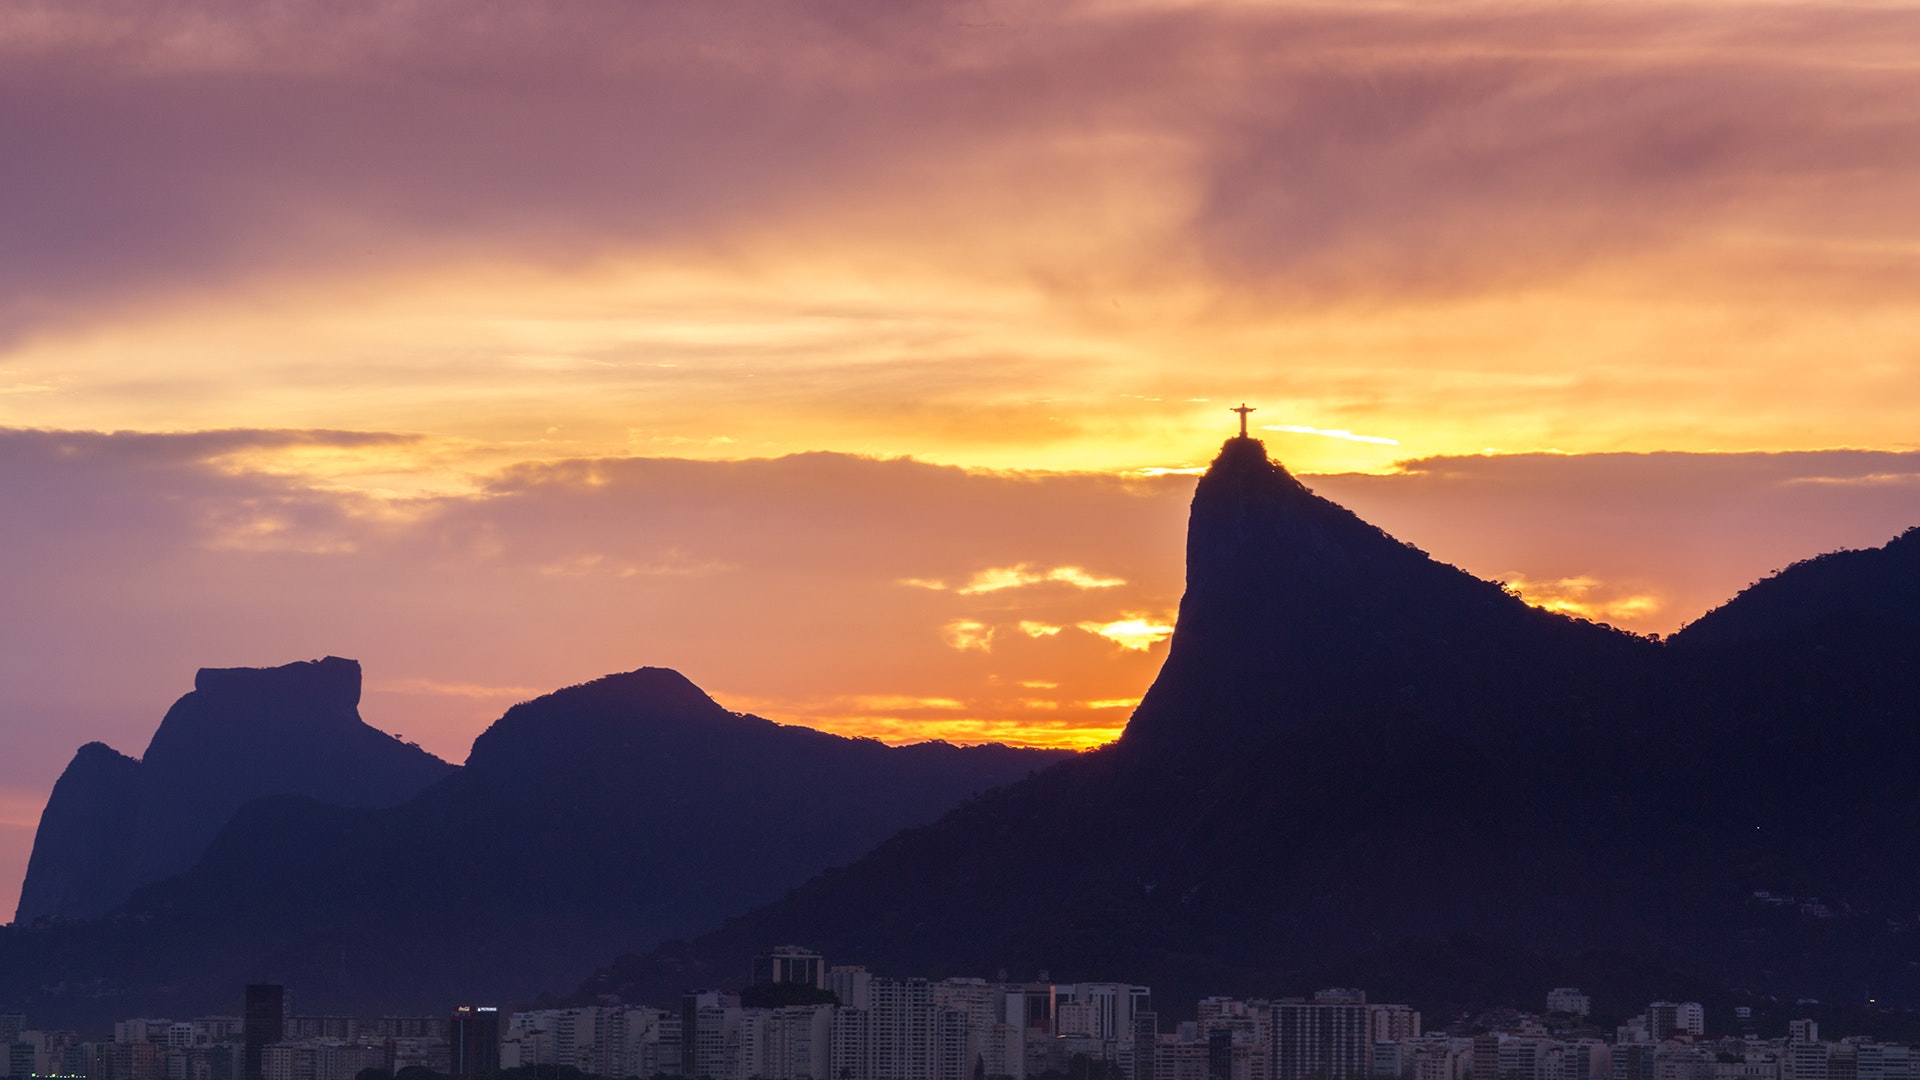 Rio de Janeiro  - New Years Eve Around The World - The Solivagant Soul